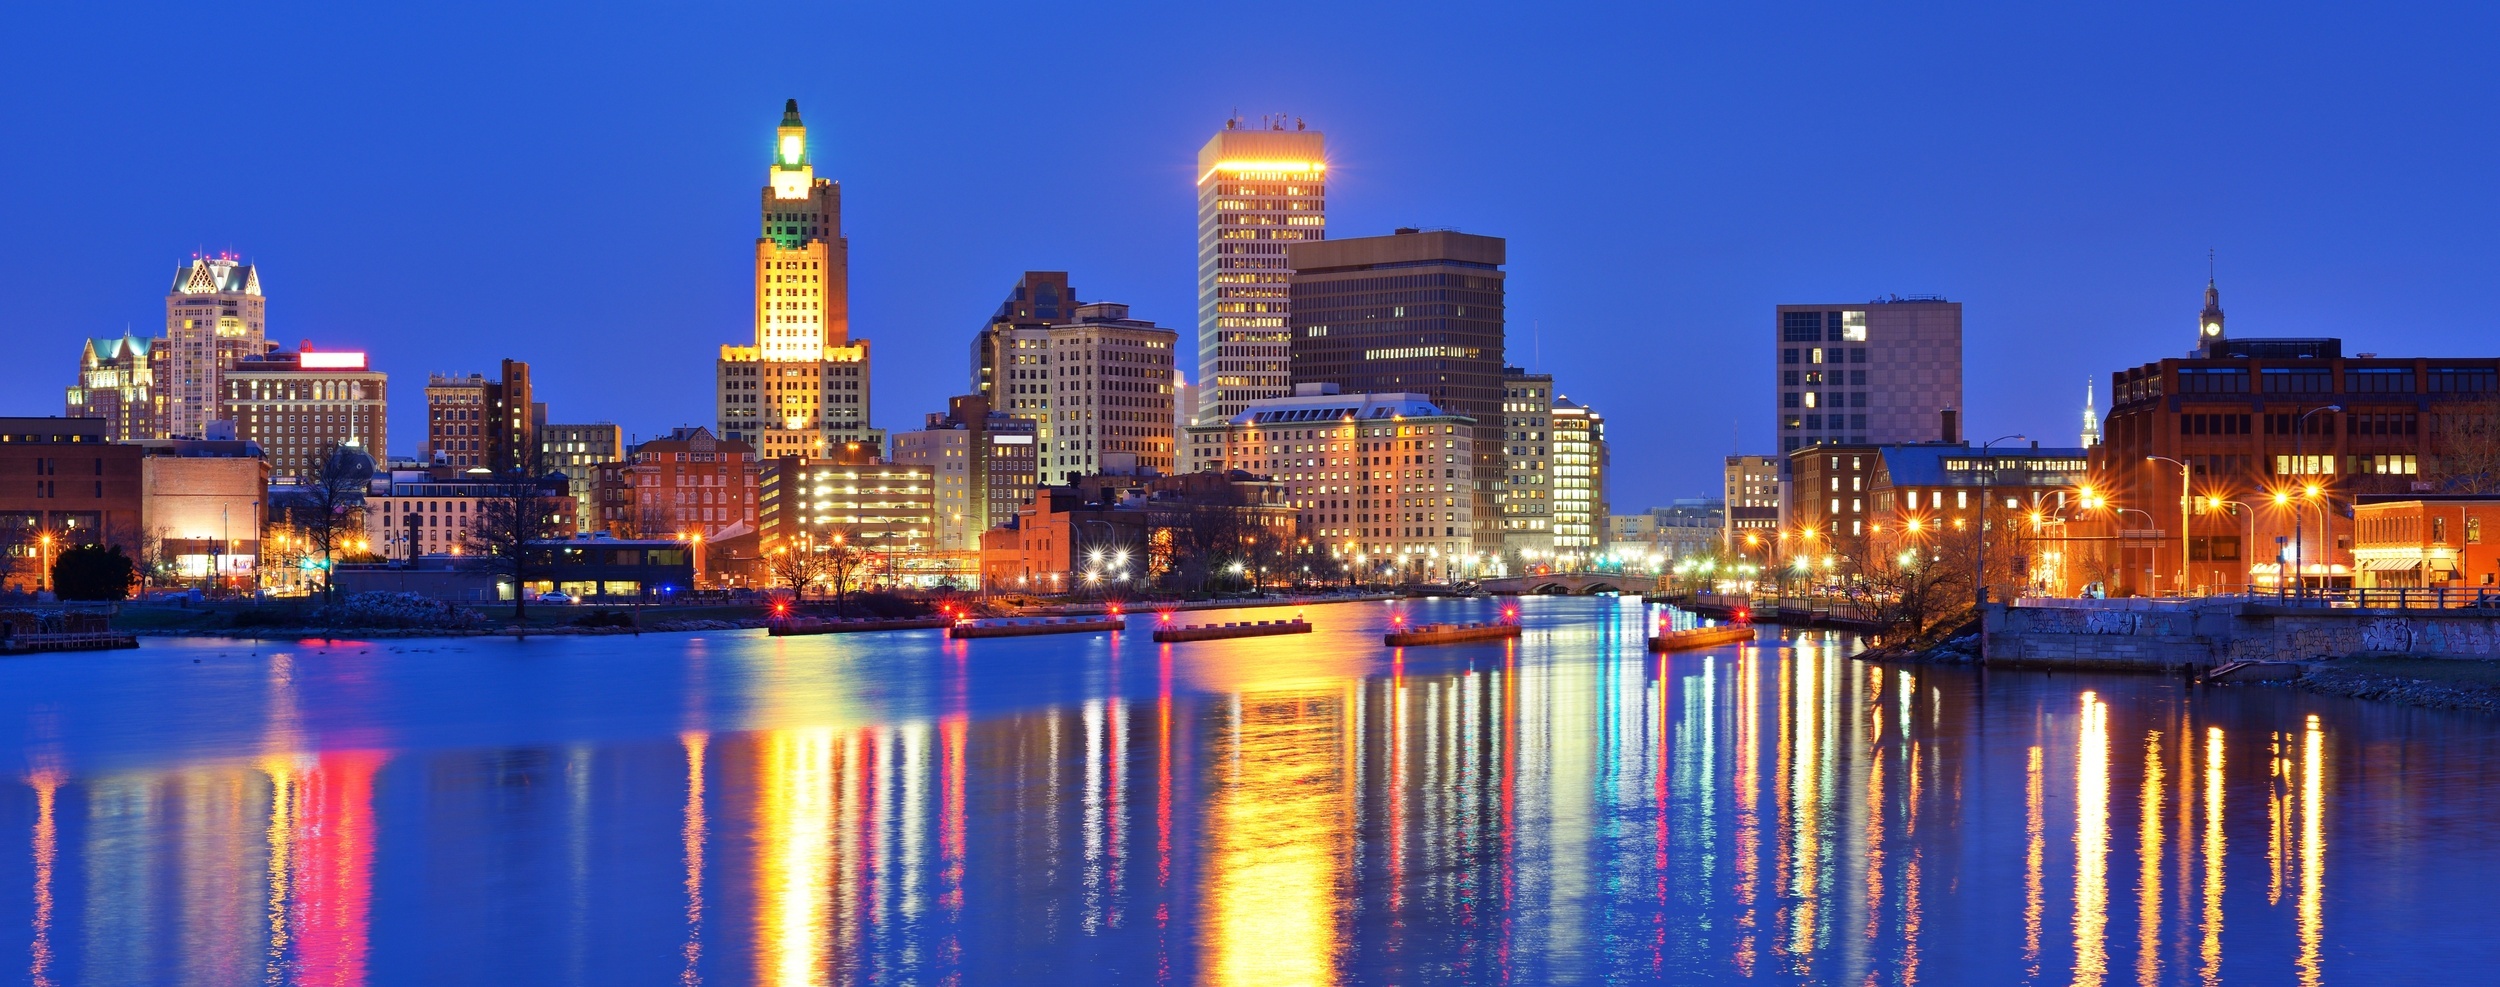 <p>Providence, Rhode Island, has an interesting nightlife but is still unexpectedly good. It's a college town and the state capital, giving it a unique blend of vibes. Add the posh coastal feel, and you have a recipe for a memorable time out. </p><p><a href='https://www.msn.com/en-us/community/channel/vid-cj9pqbr0vn9in2b6ddcd8sfgpfq6x6utp44fssrv6mc2gtybw0us'>Follow us on MSN to see more of our exclusive lifestyle content.</a></p>